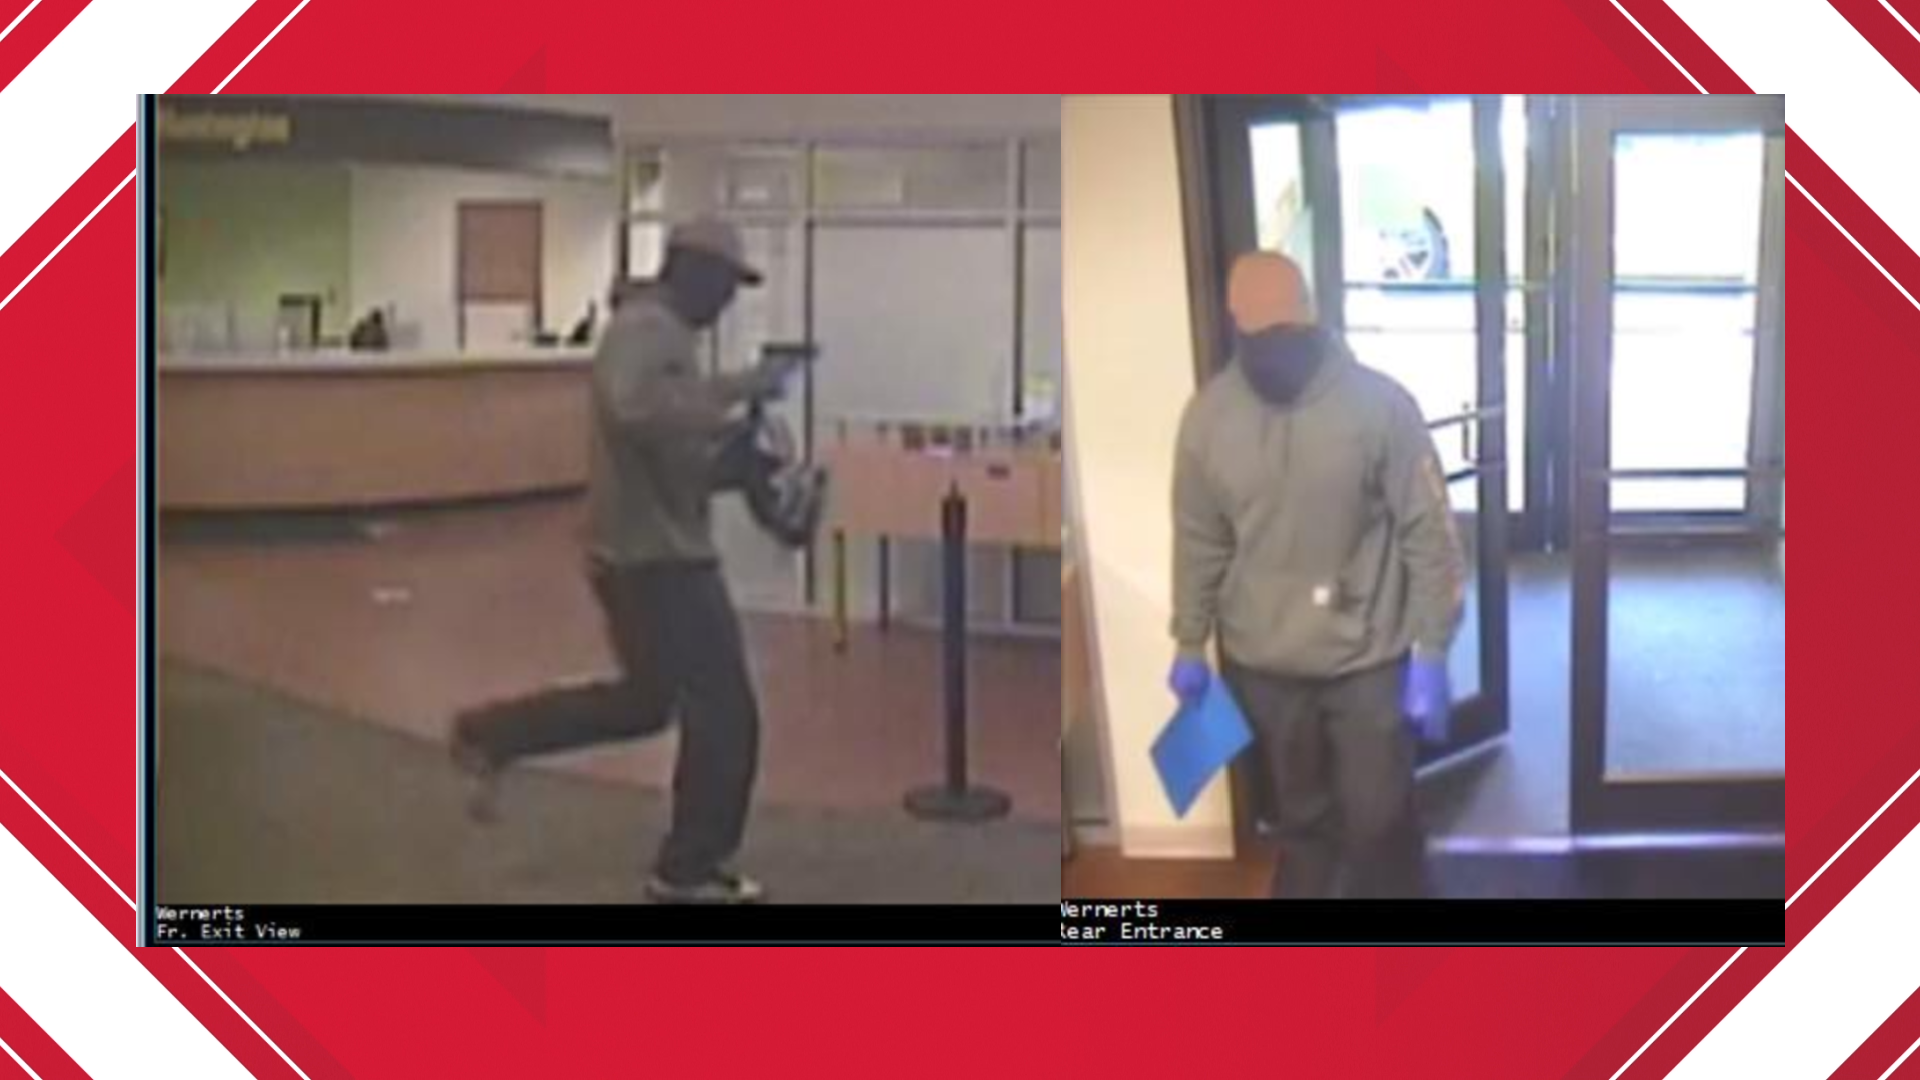 According to Toledo Police, the suspect entered the bank around 4:42 p.m. and demanded cash. He had a black semi-automatic handgun.